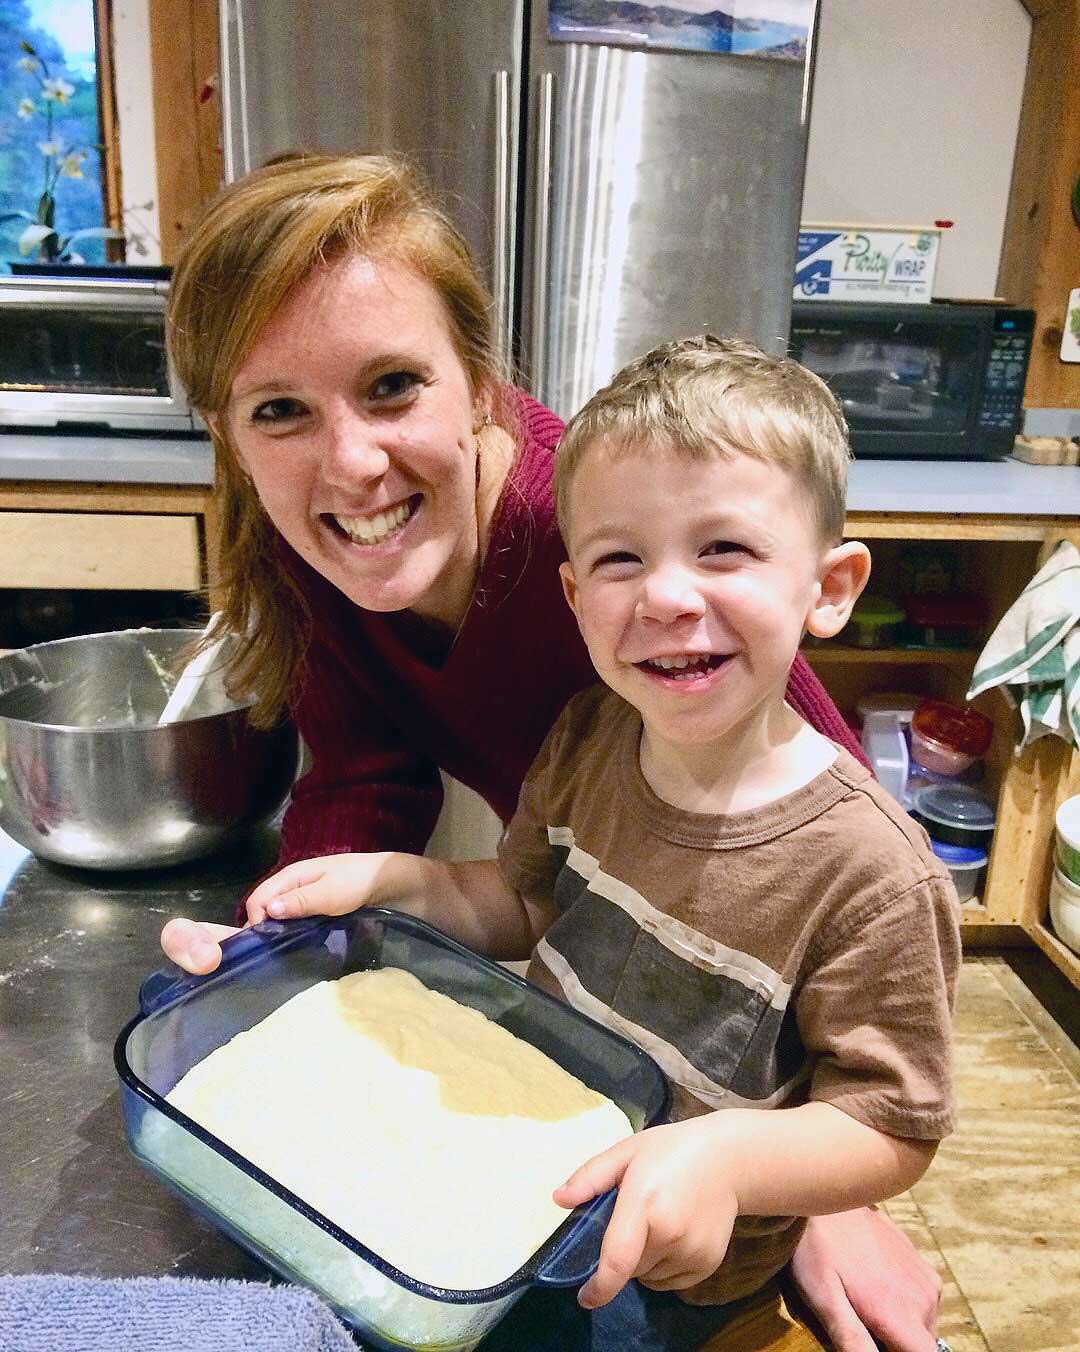 A woman standing next to a child who is smiling, holding up the cake they baked